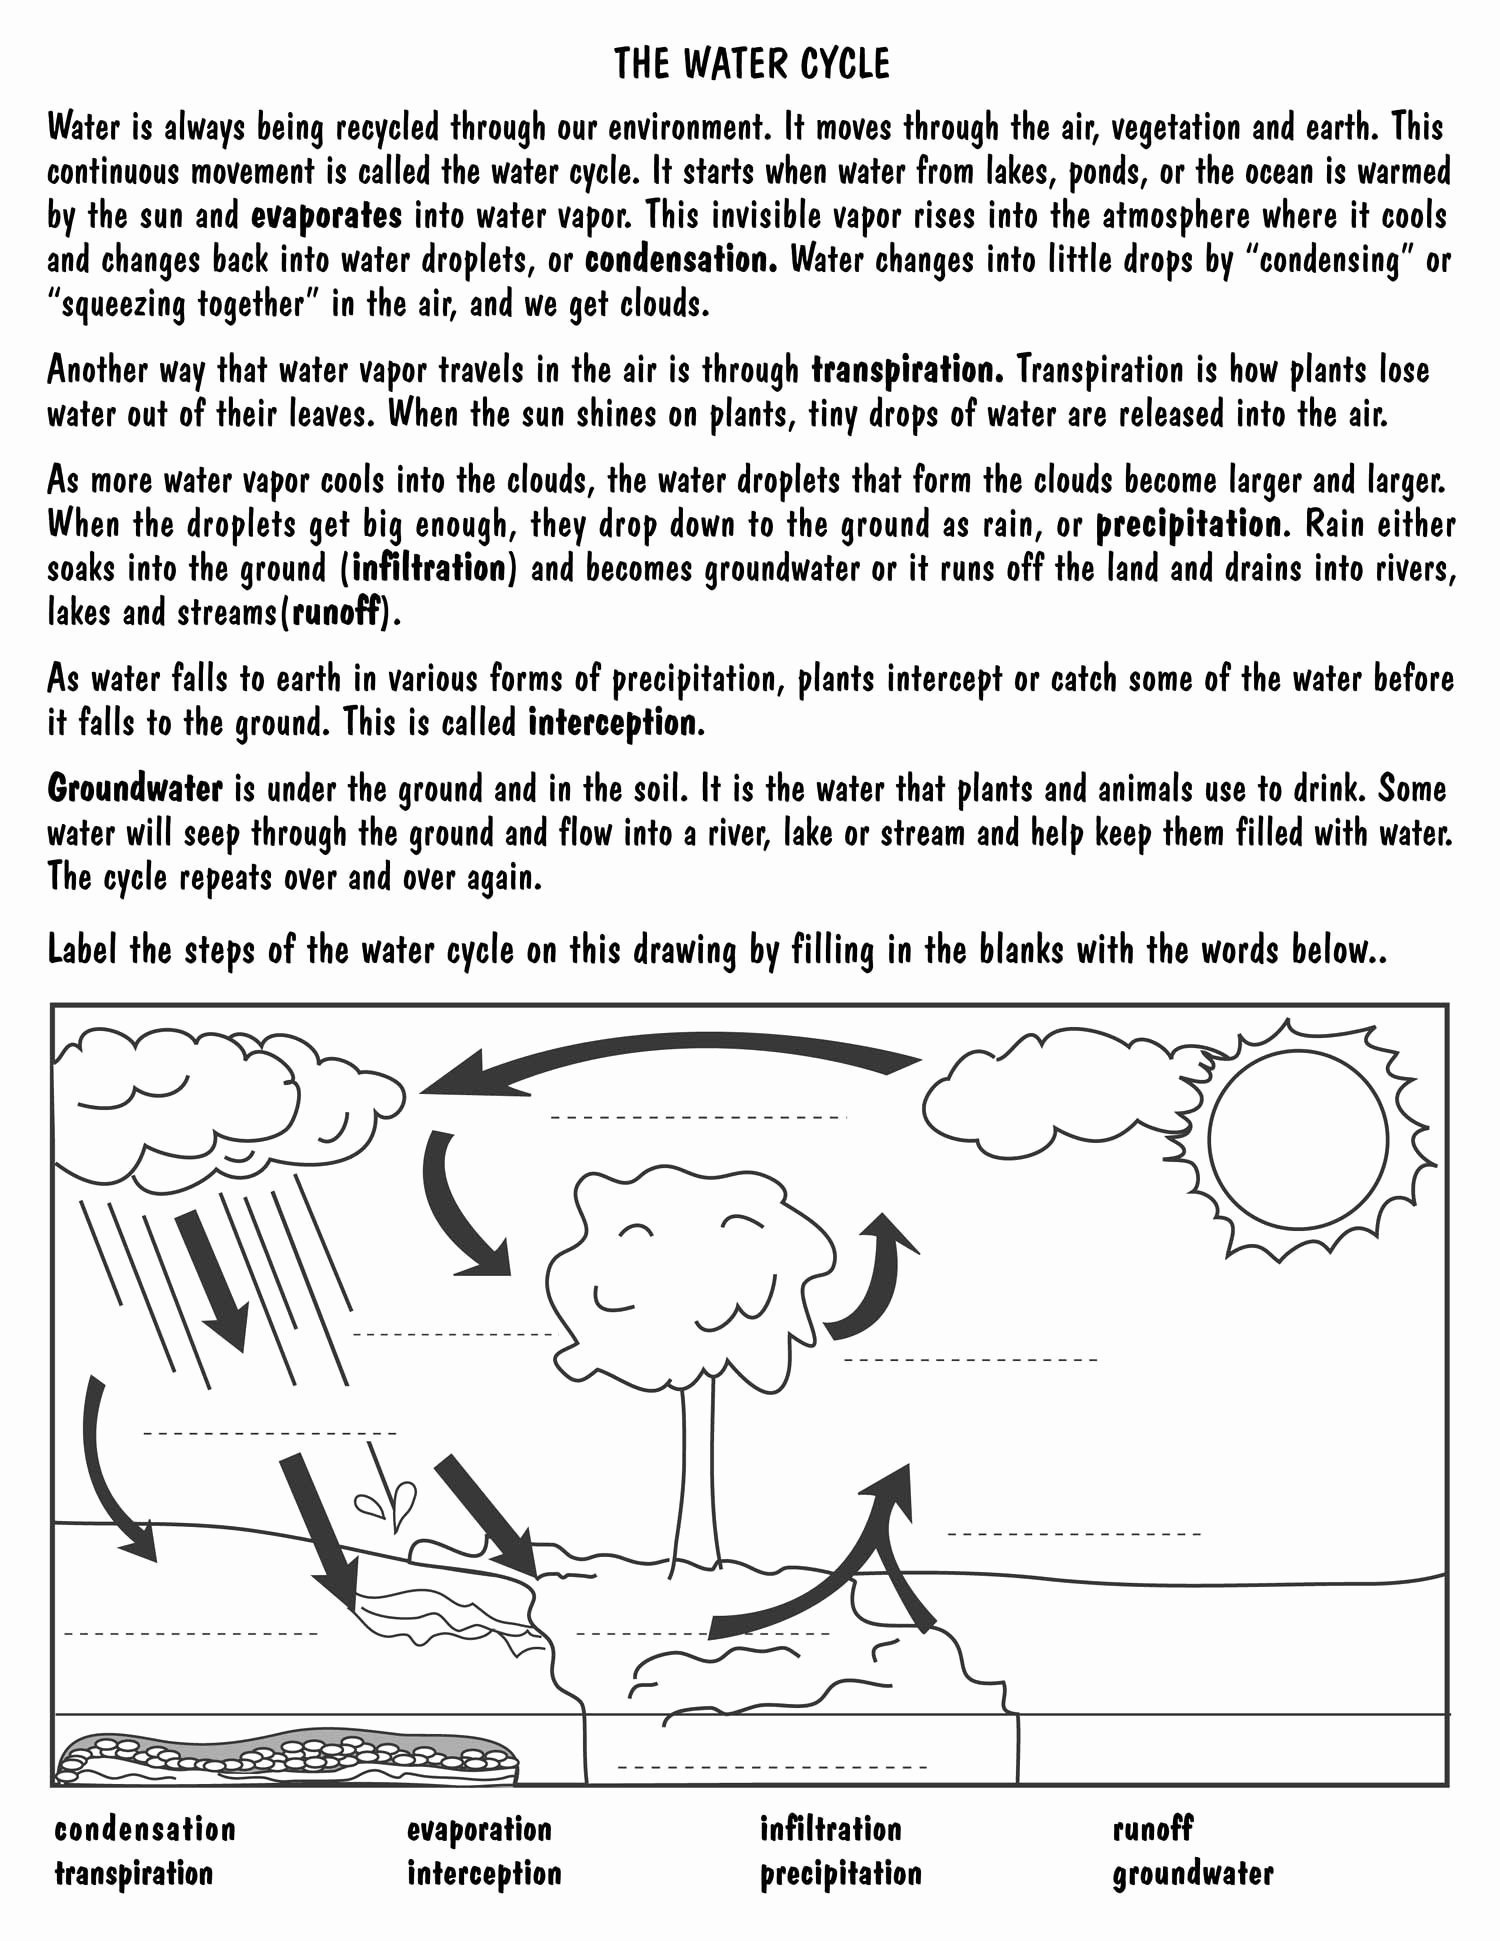 Water Cycle Worksheet Pdf Fresh Water Cycle Diagram for Kids to Label